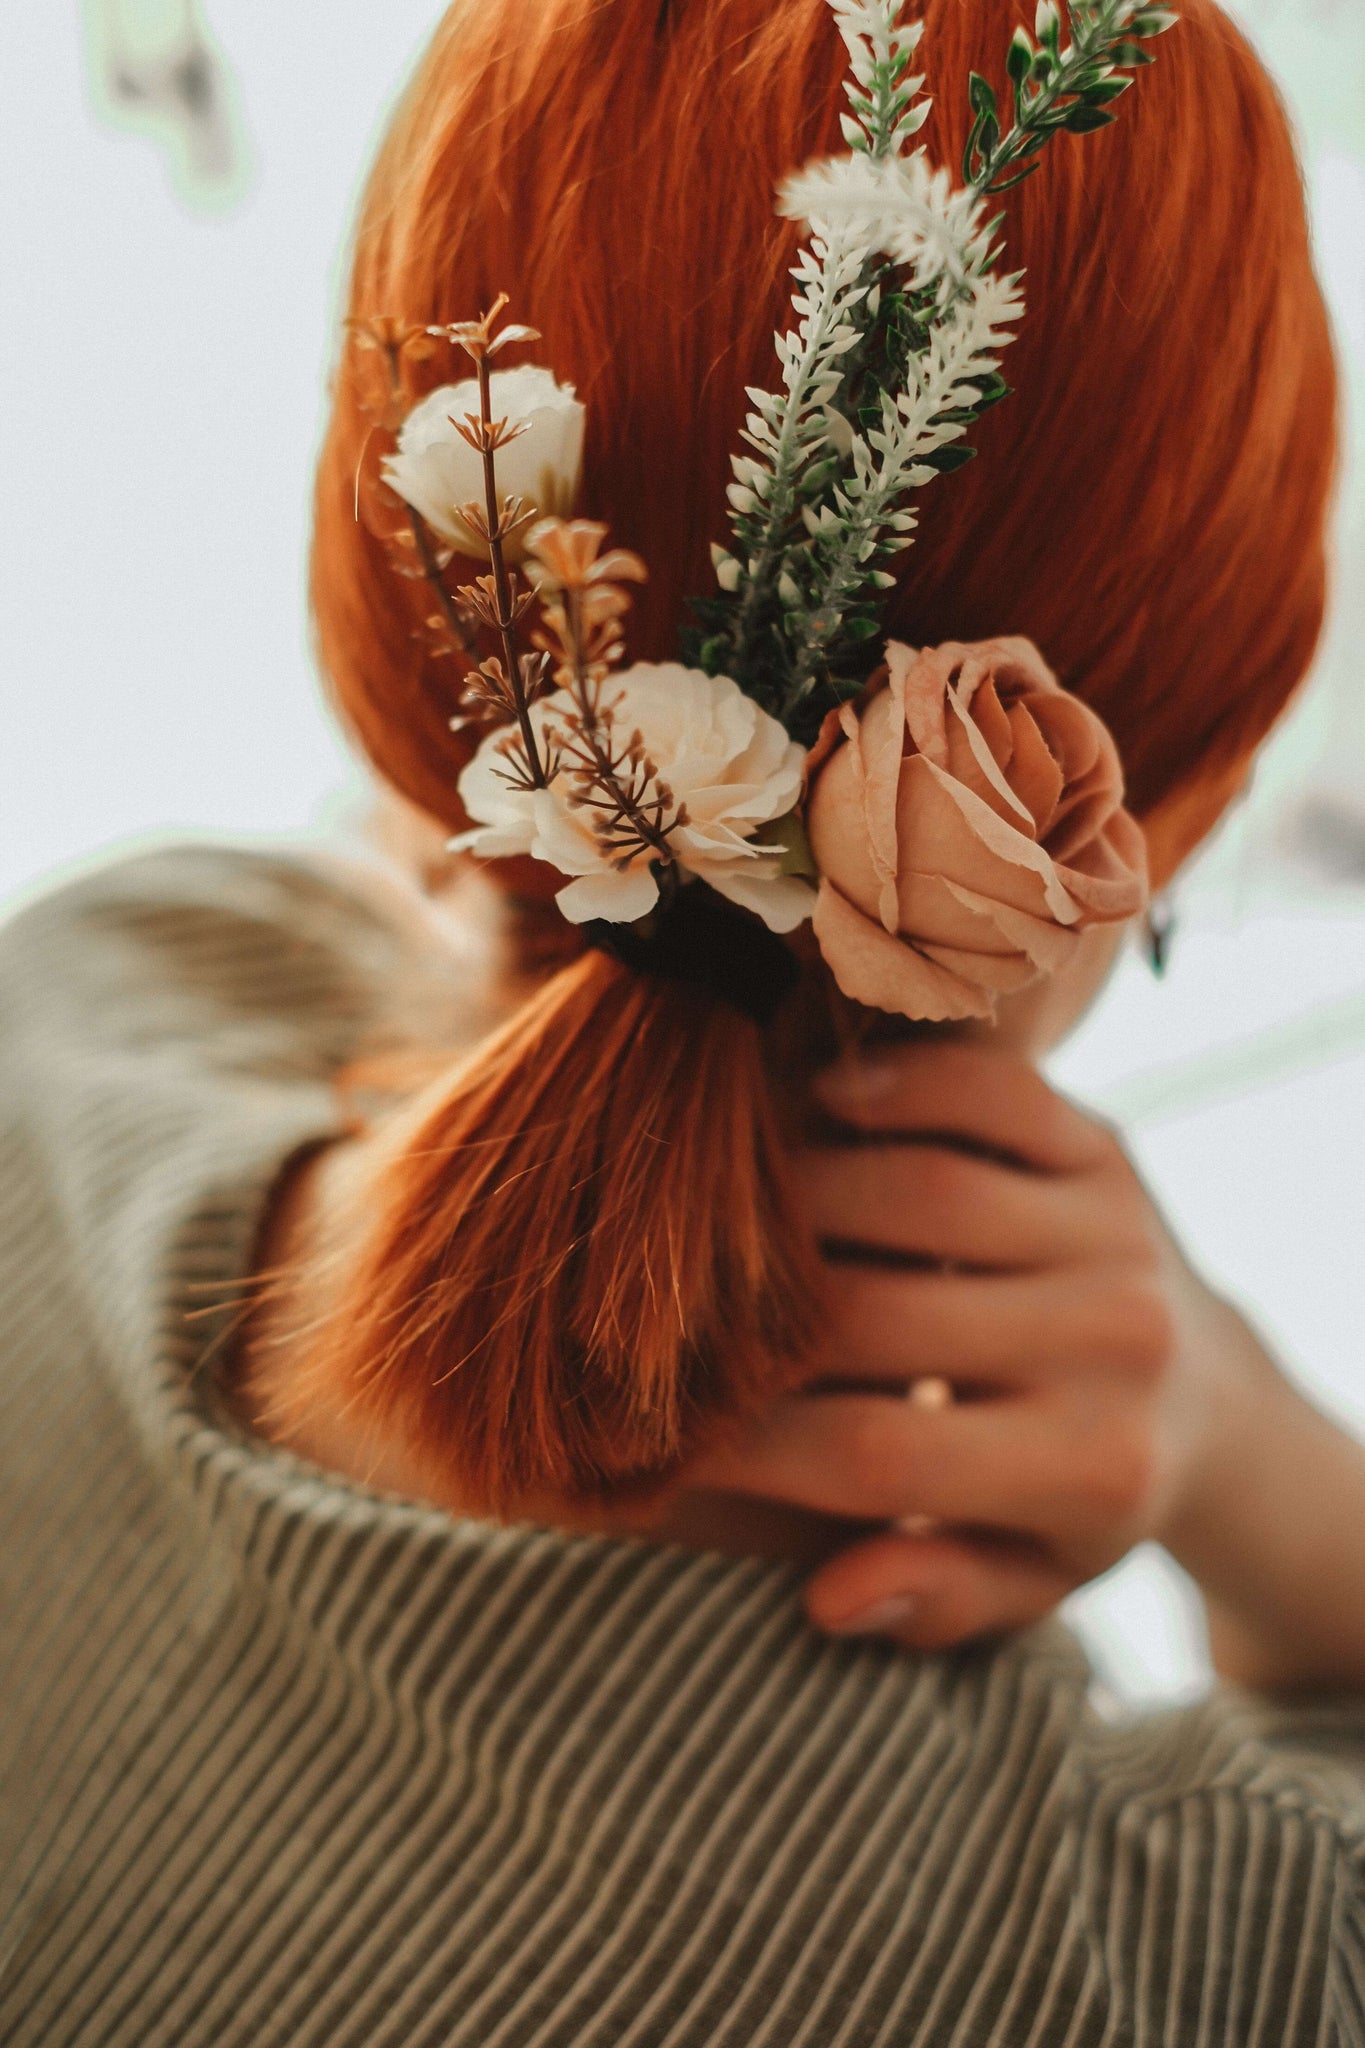 The bride dons a chic ponytail accented with striking flowers for her wedding day.